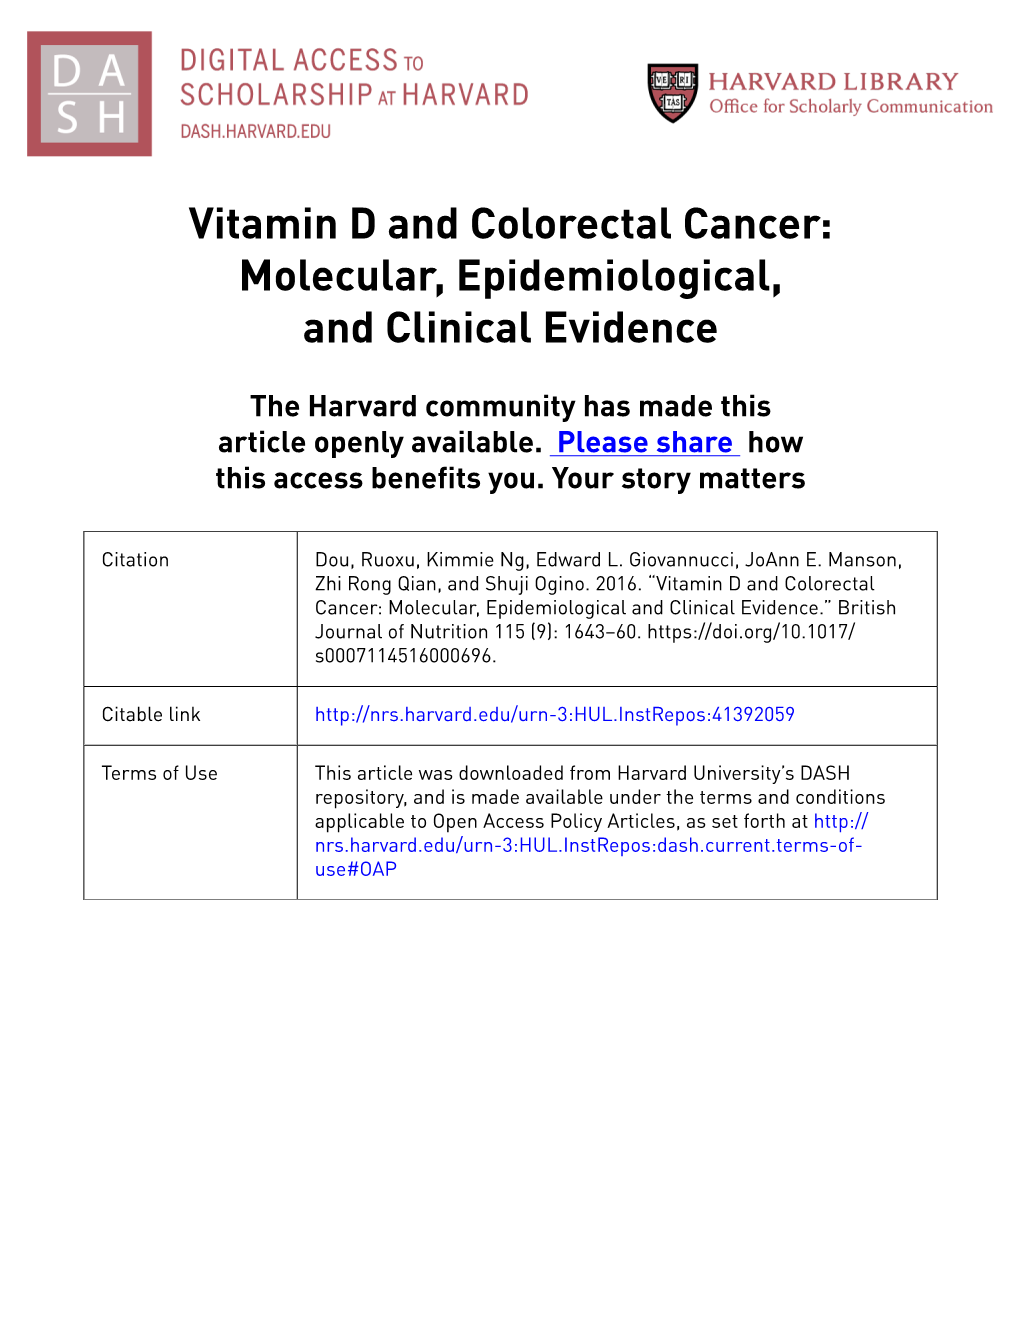 Vitamin D and Colorectal Cancer: Molecular, Epidemiological, and Clinical Evidence